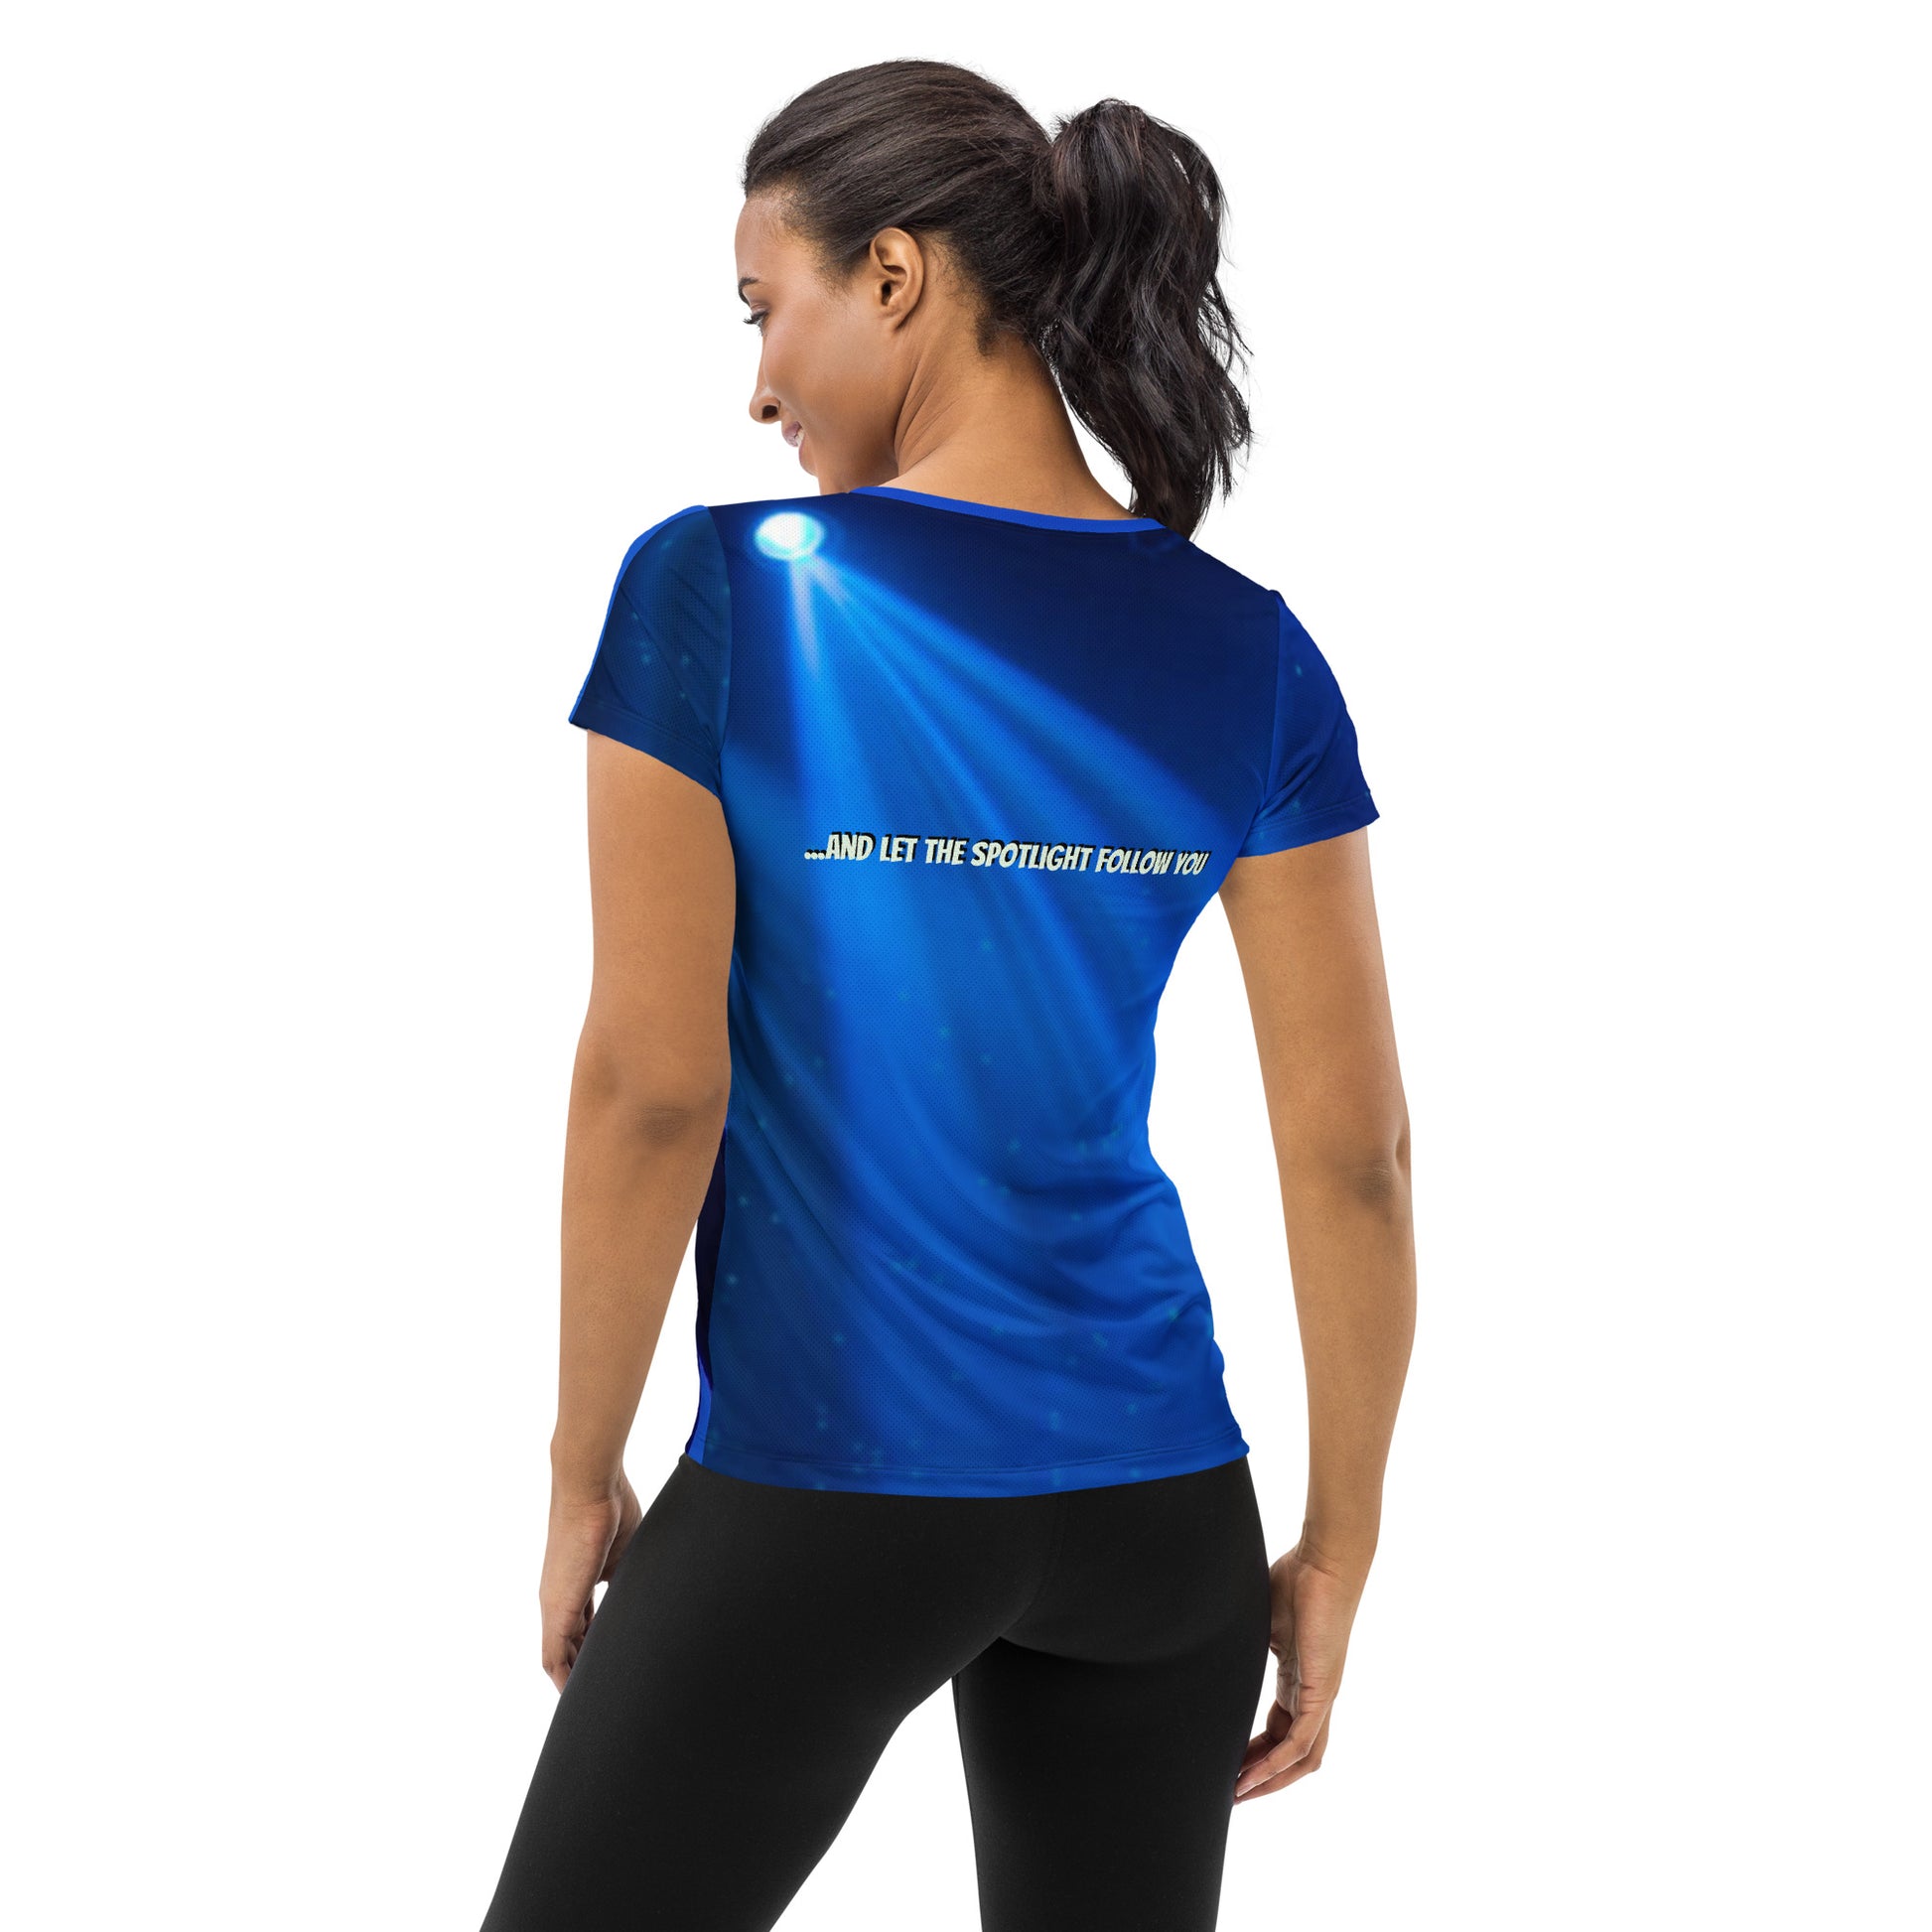 LBS Motivation Women's Athletic Tee for the Artist who seeks the spotlight